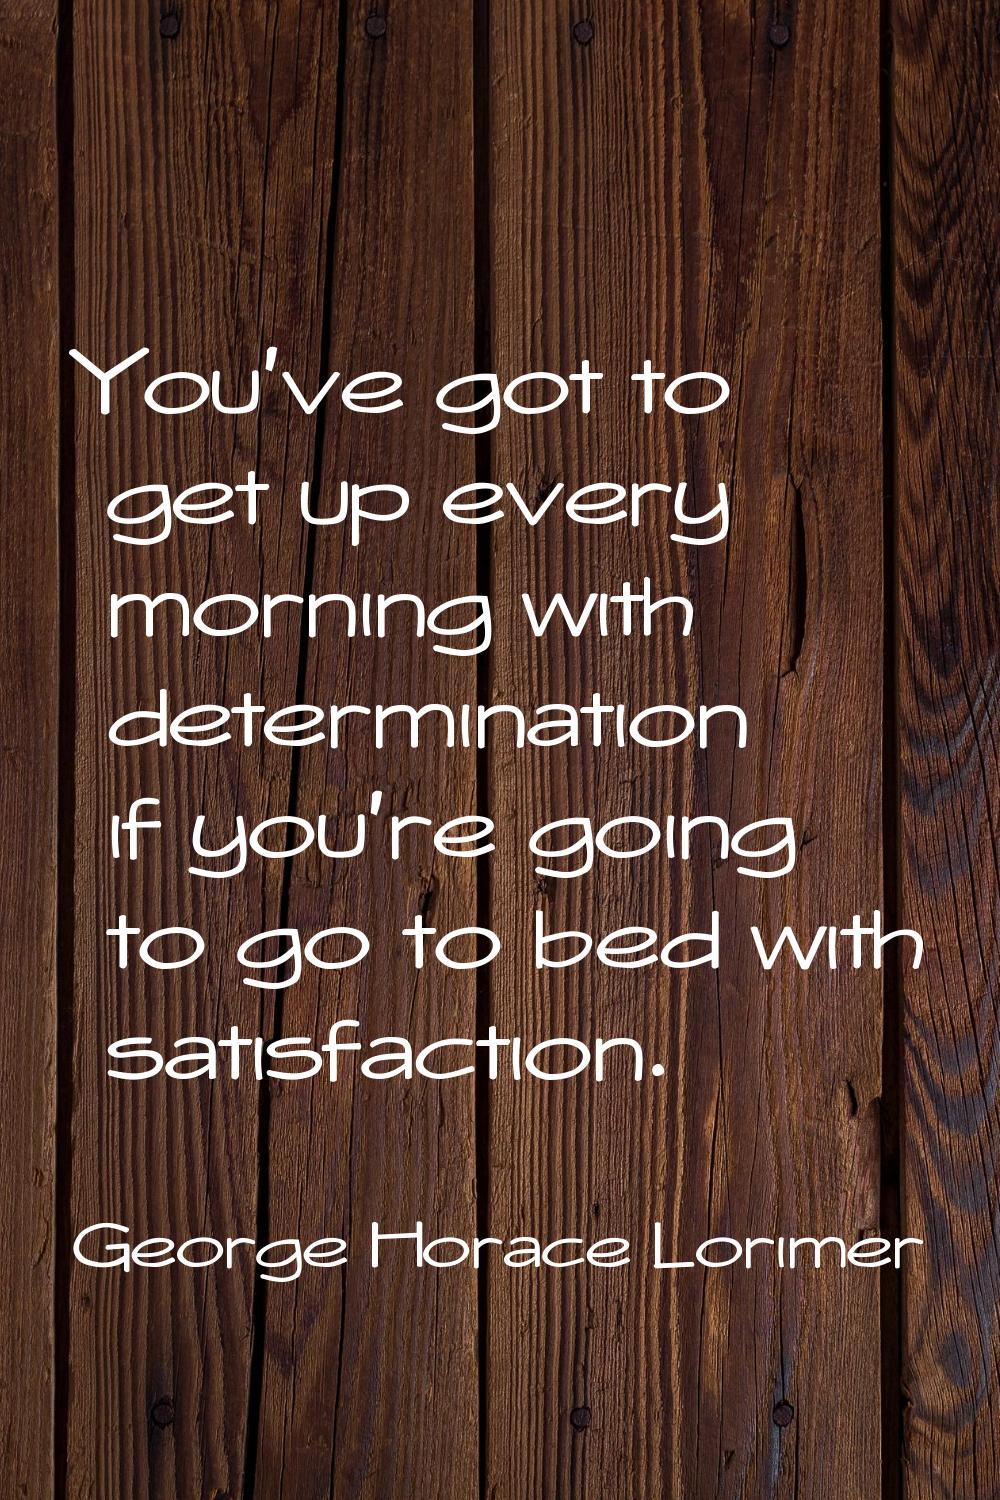 You've got to get up every morning with determination if you're going to go to bed with satisfactio